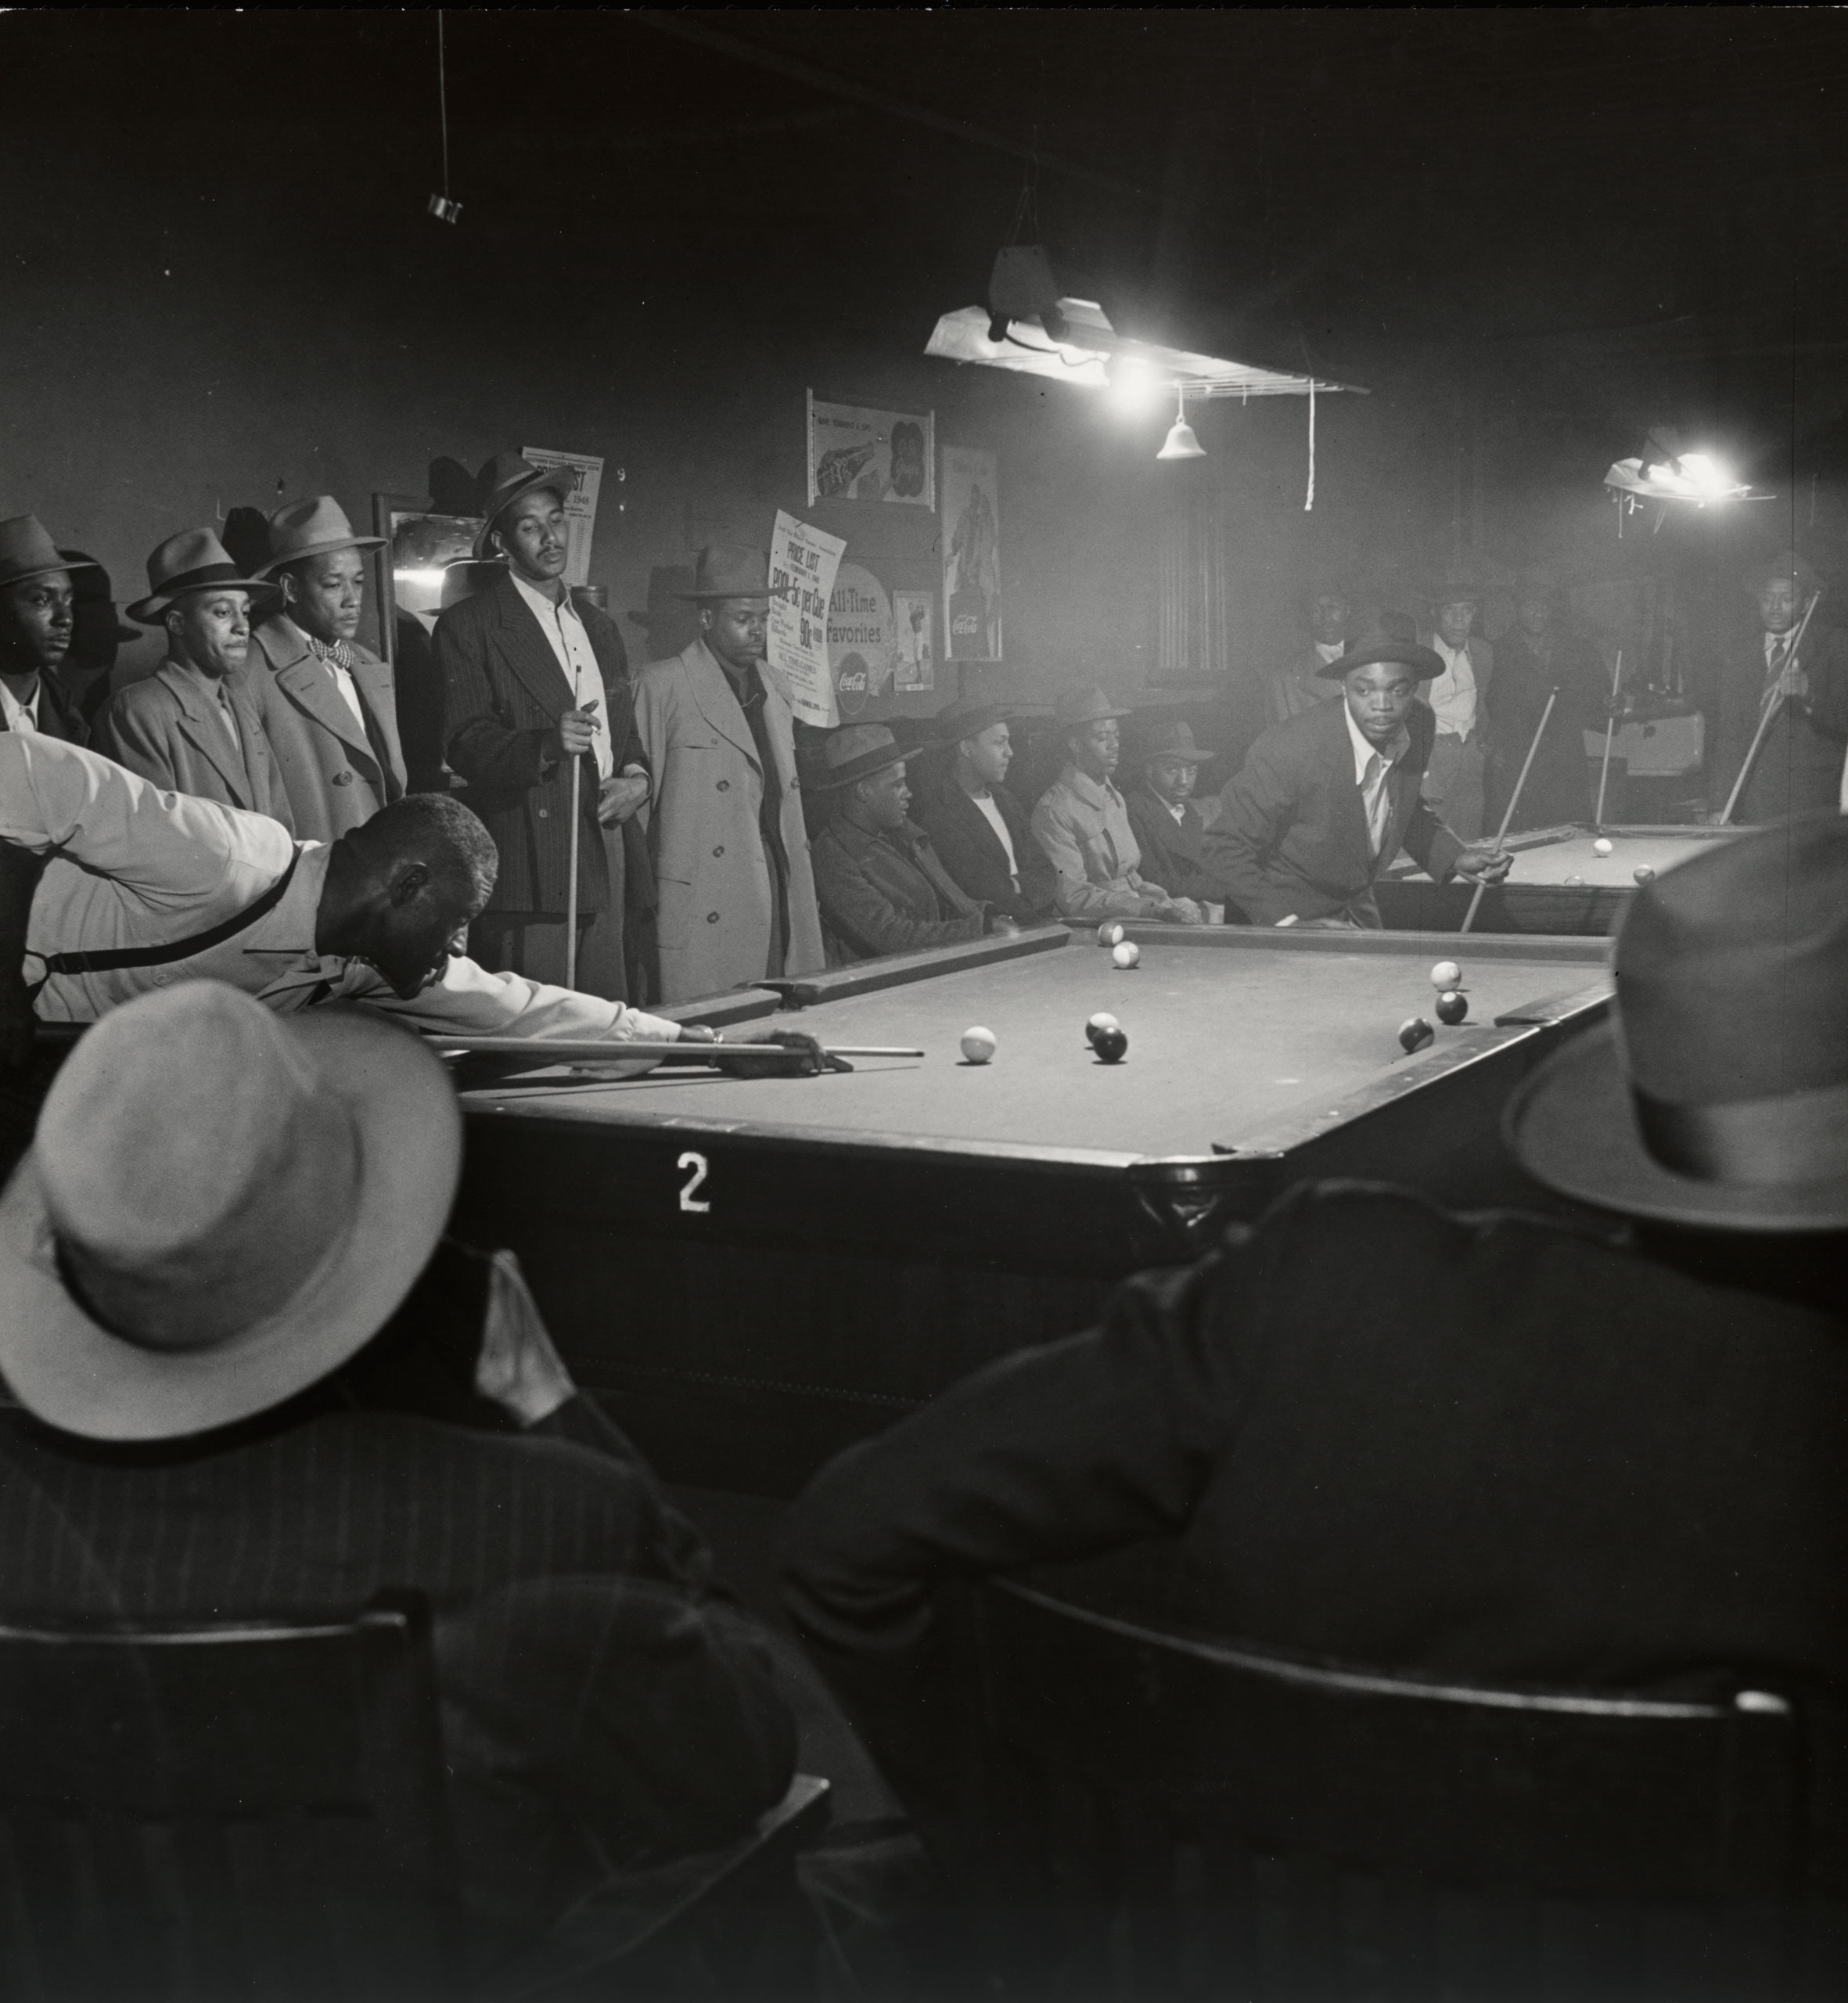 An afternoon game at Table 2, from the series The Way of Life of the Northern Negro, 1946-1948.